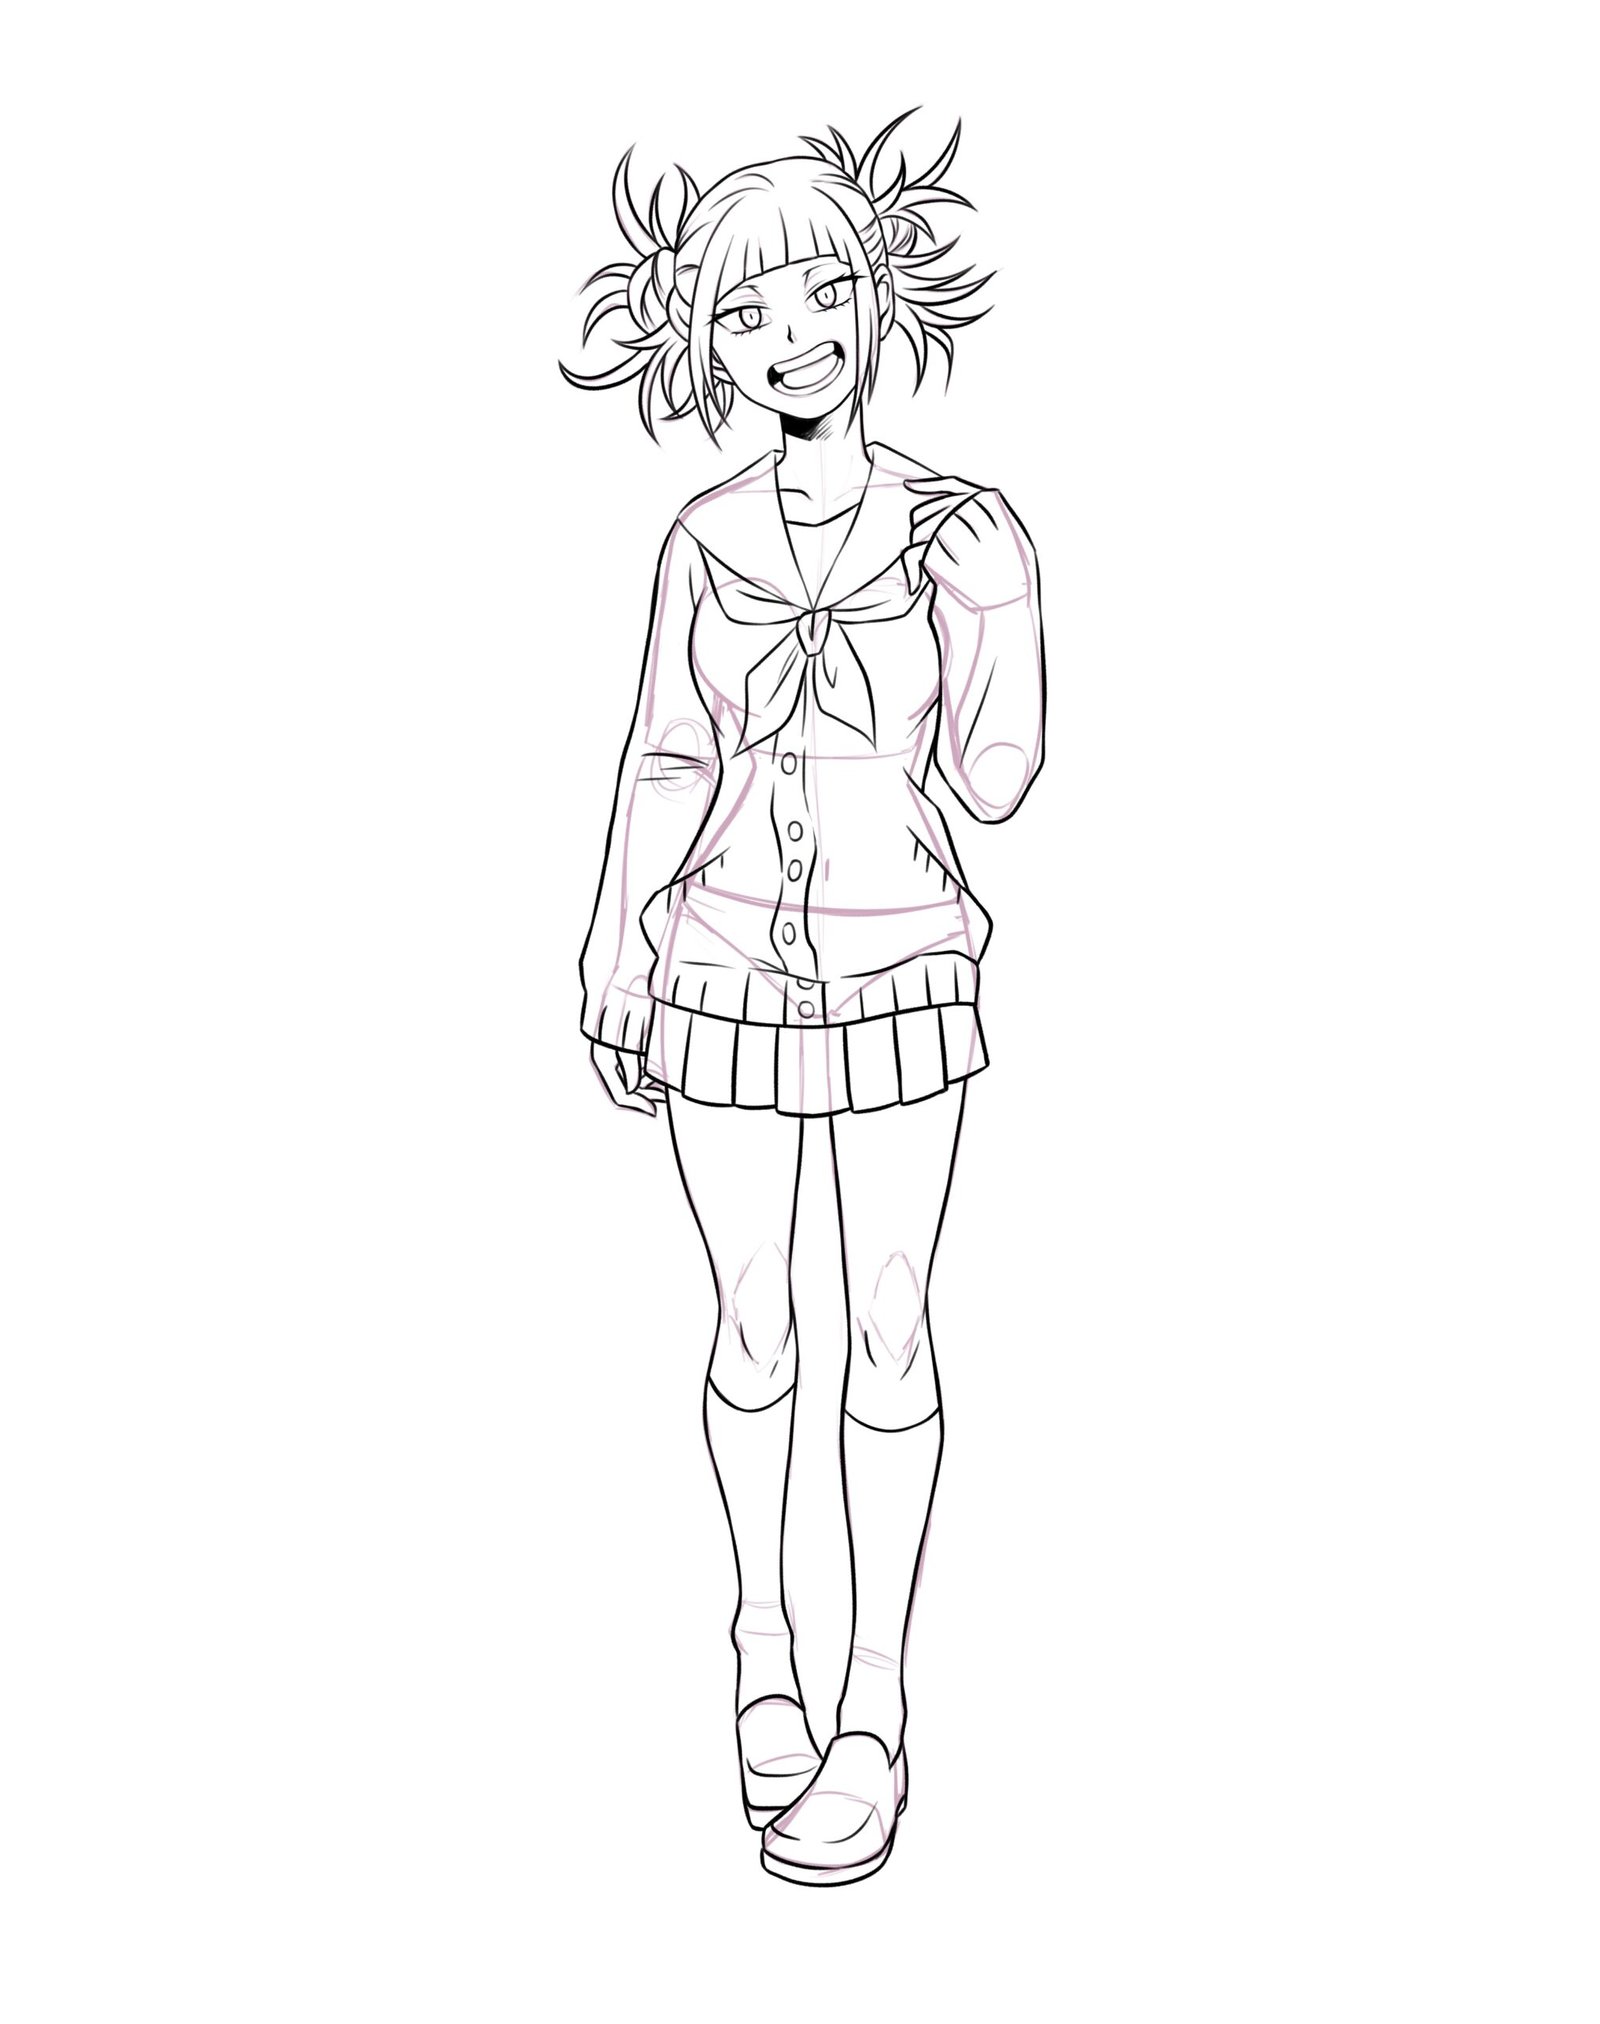 3) Draw Himiko Toga's outfit